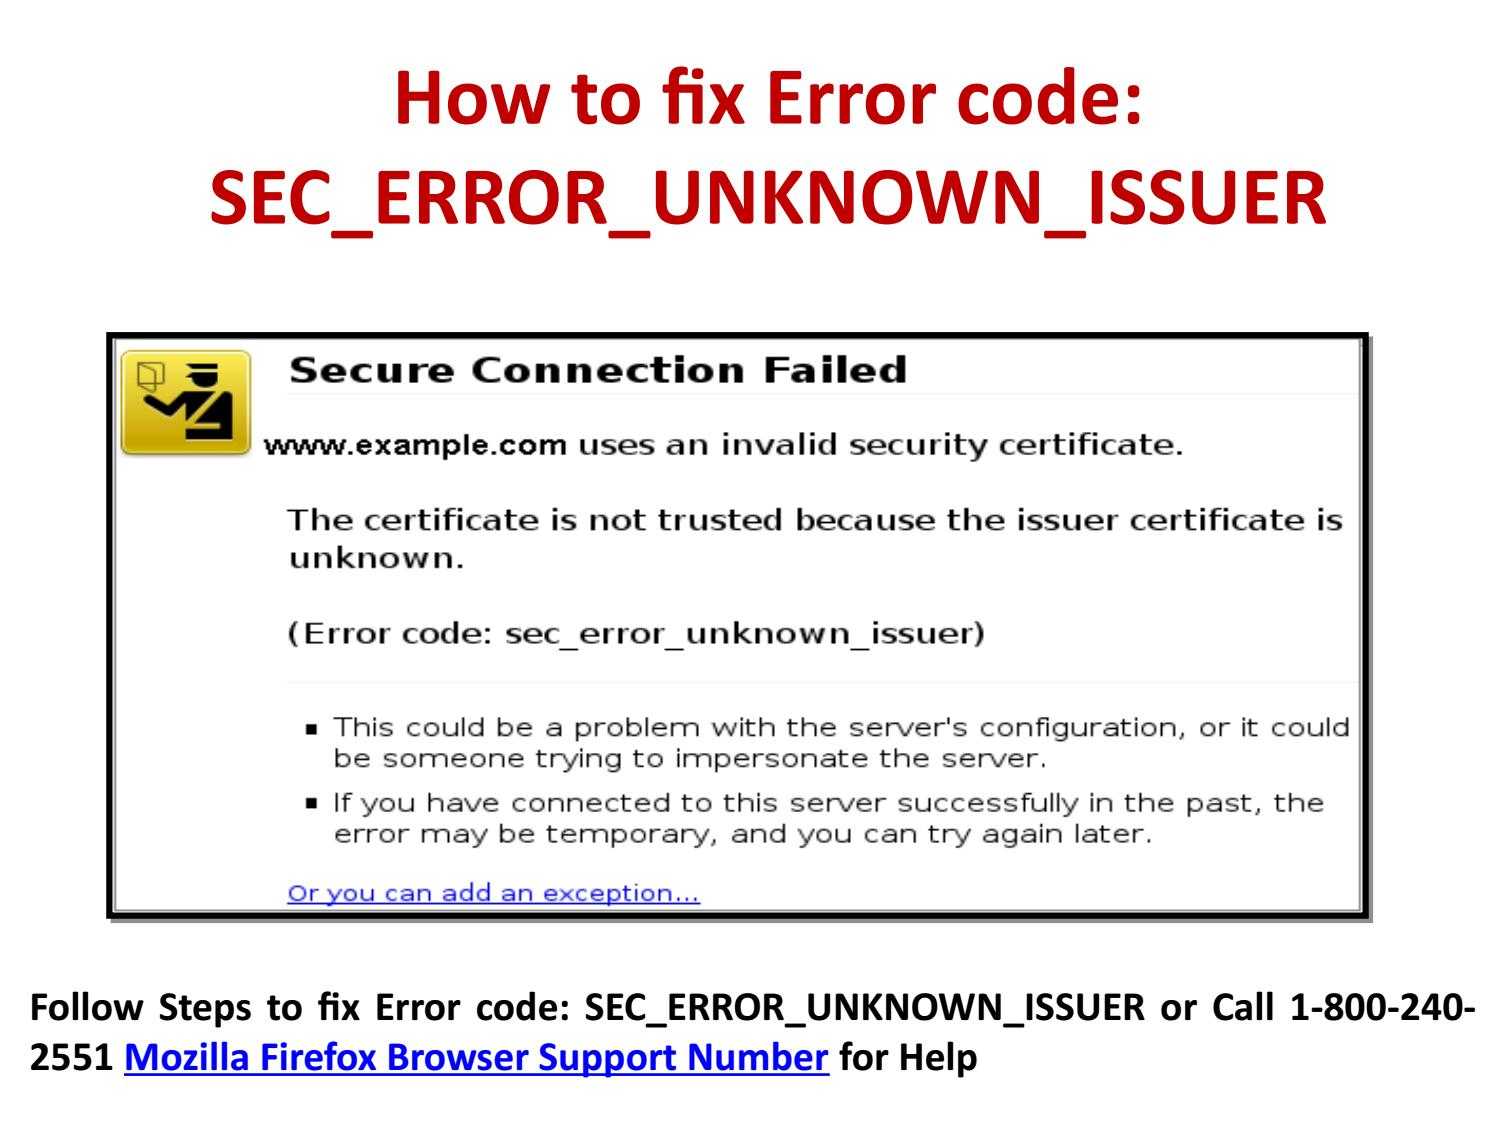 How to troubleshoot security error codes on secure websites | i-firefox uncedo